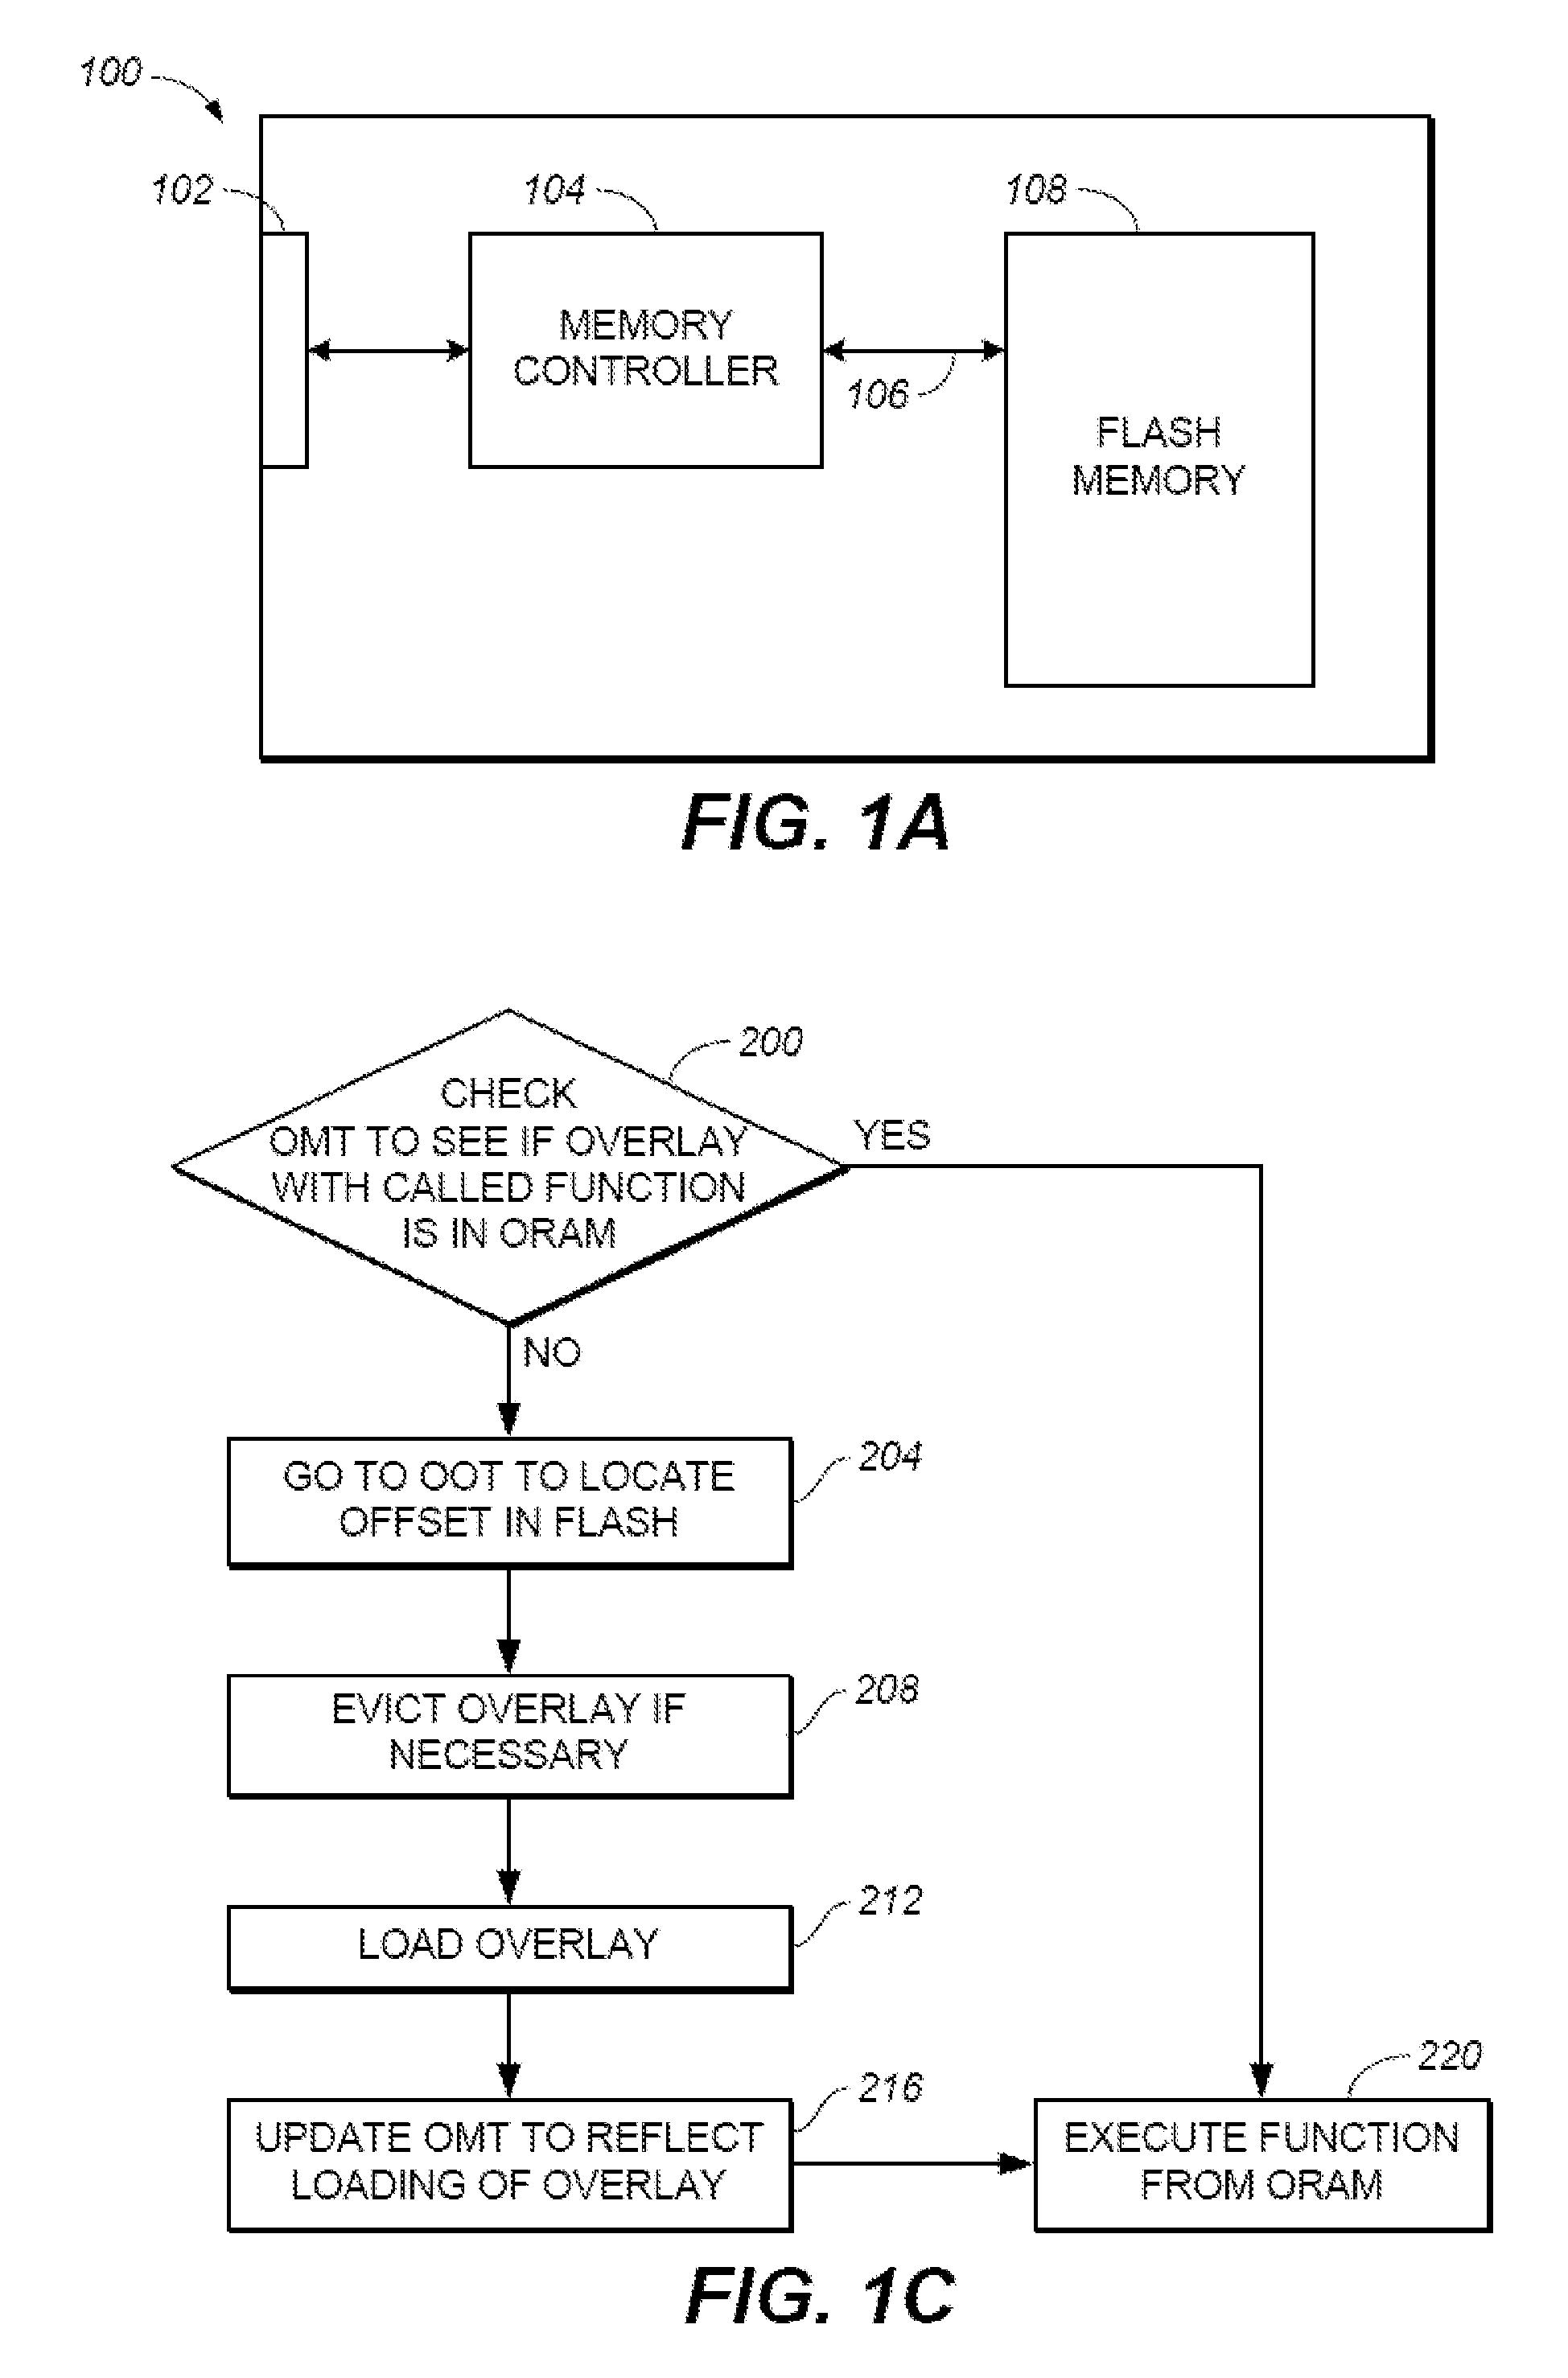 Avoidance of self eviction caused by dynamic memory allocation in a flash memory storage device